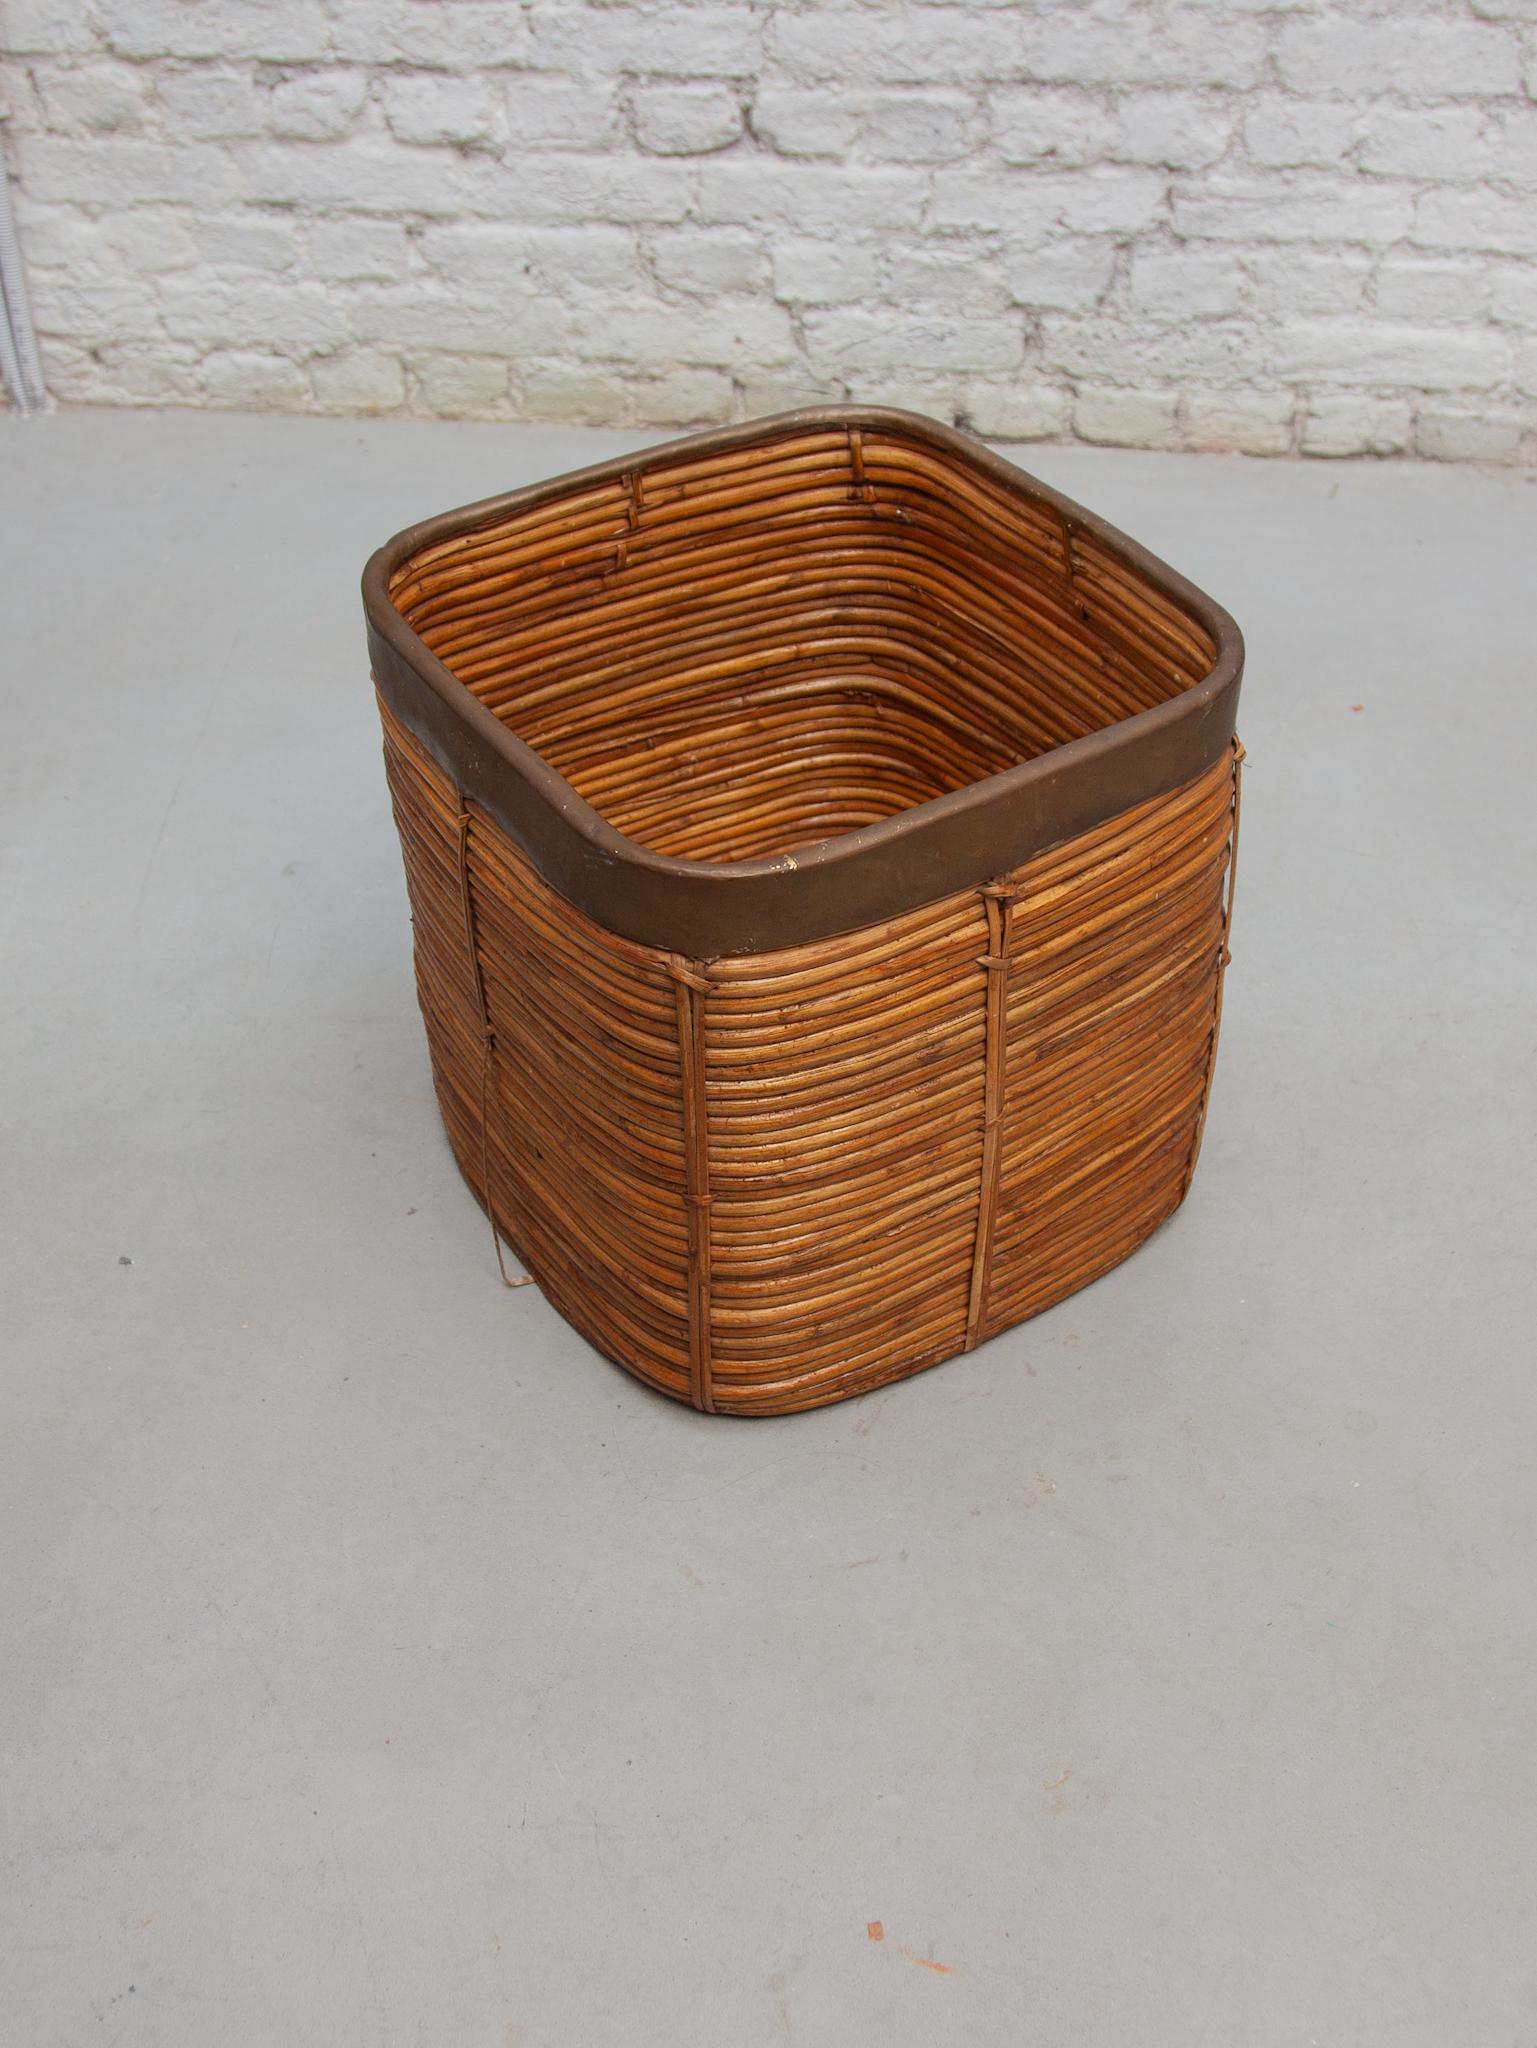 Large Mid-Century Gabriella Crespi Style Brass & Rattan Bamboo Cube Planter For Sale 3